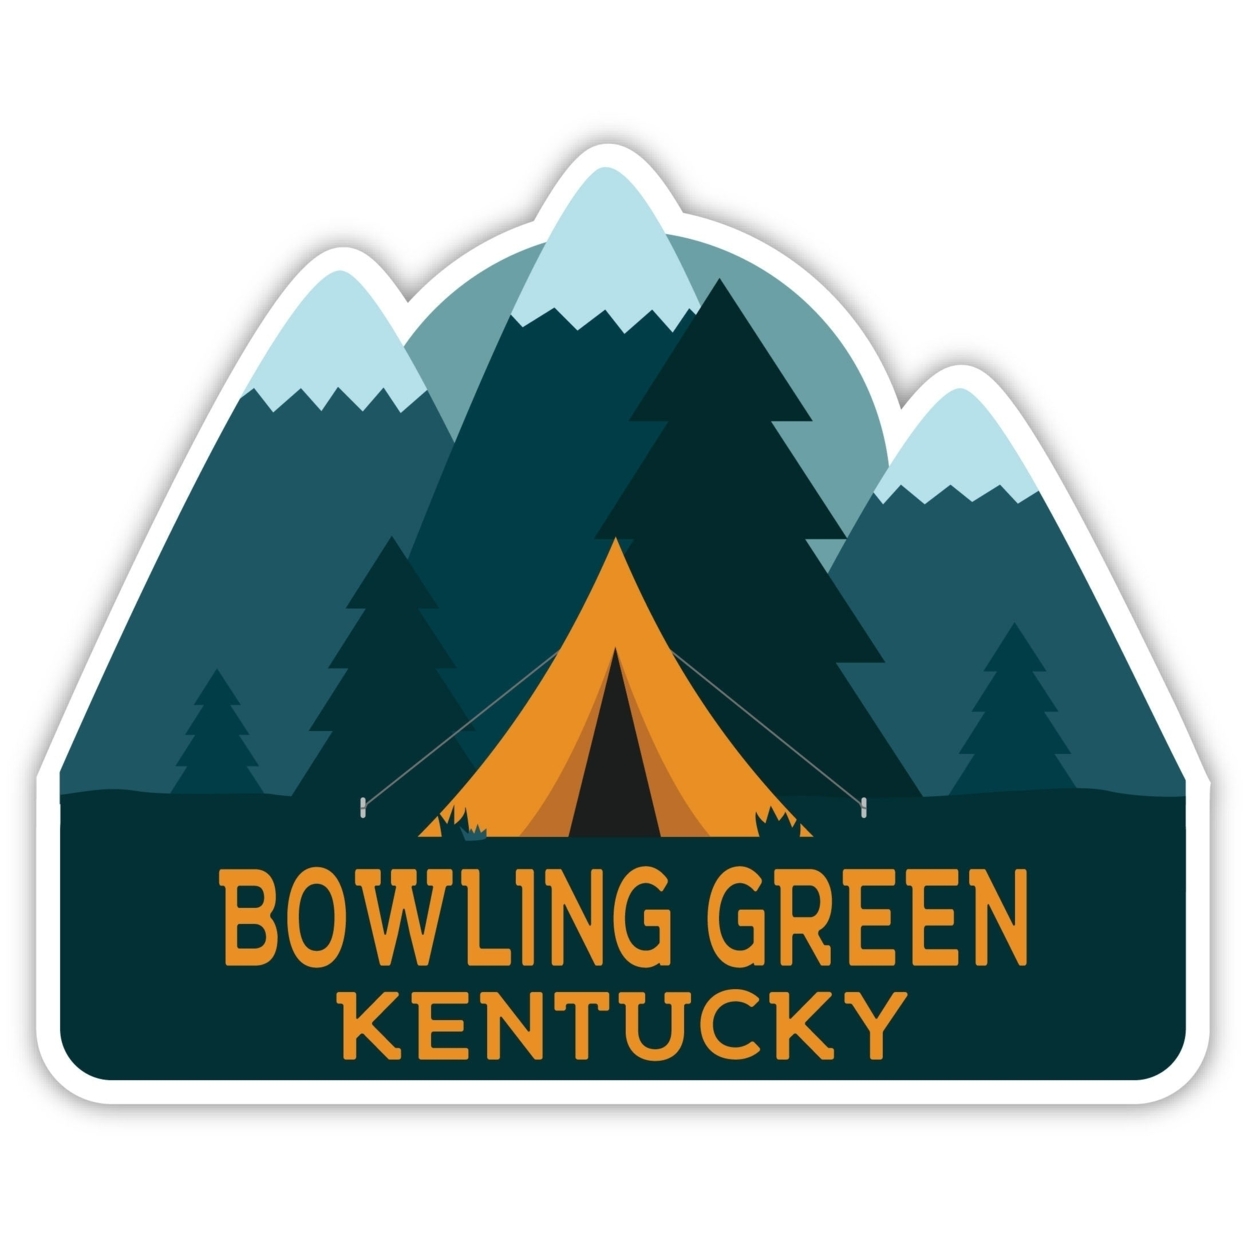 Bowling Green Kentucky Souvenir Decorative Stickers (Choose Theme And Size) - 4-Pack, 4-Inch, Bear